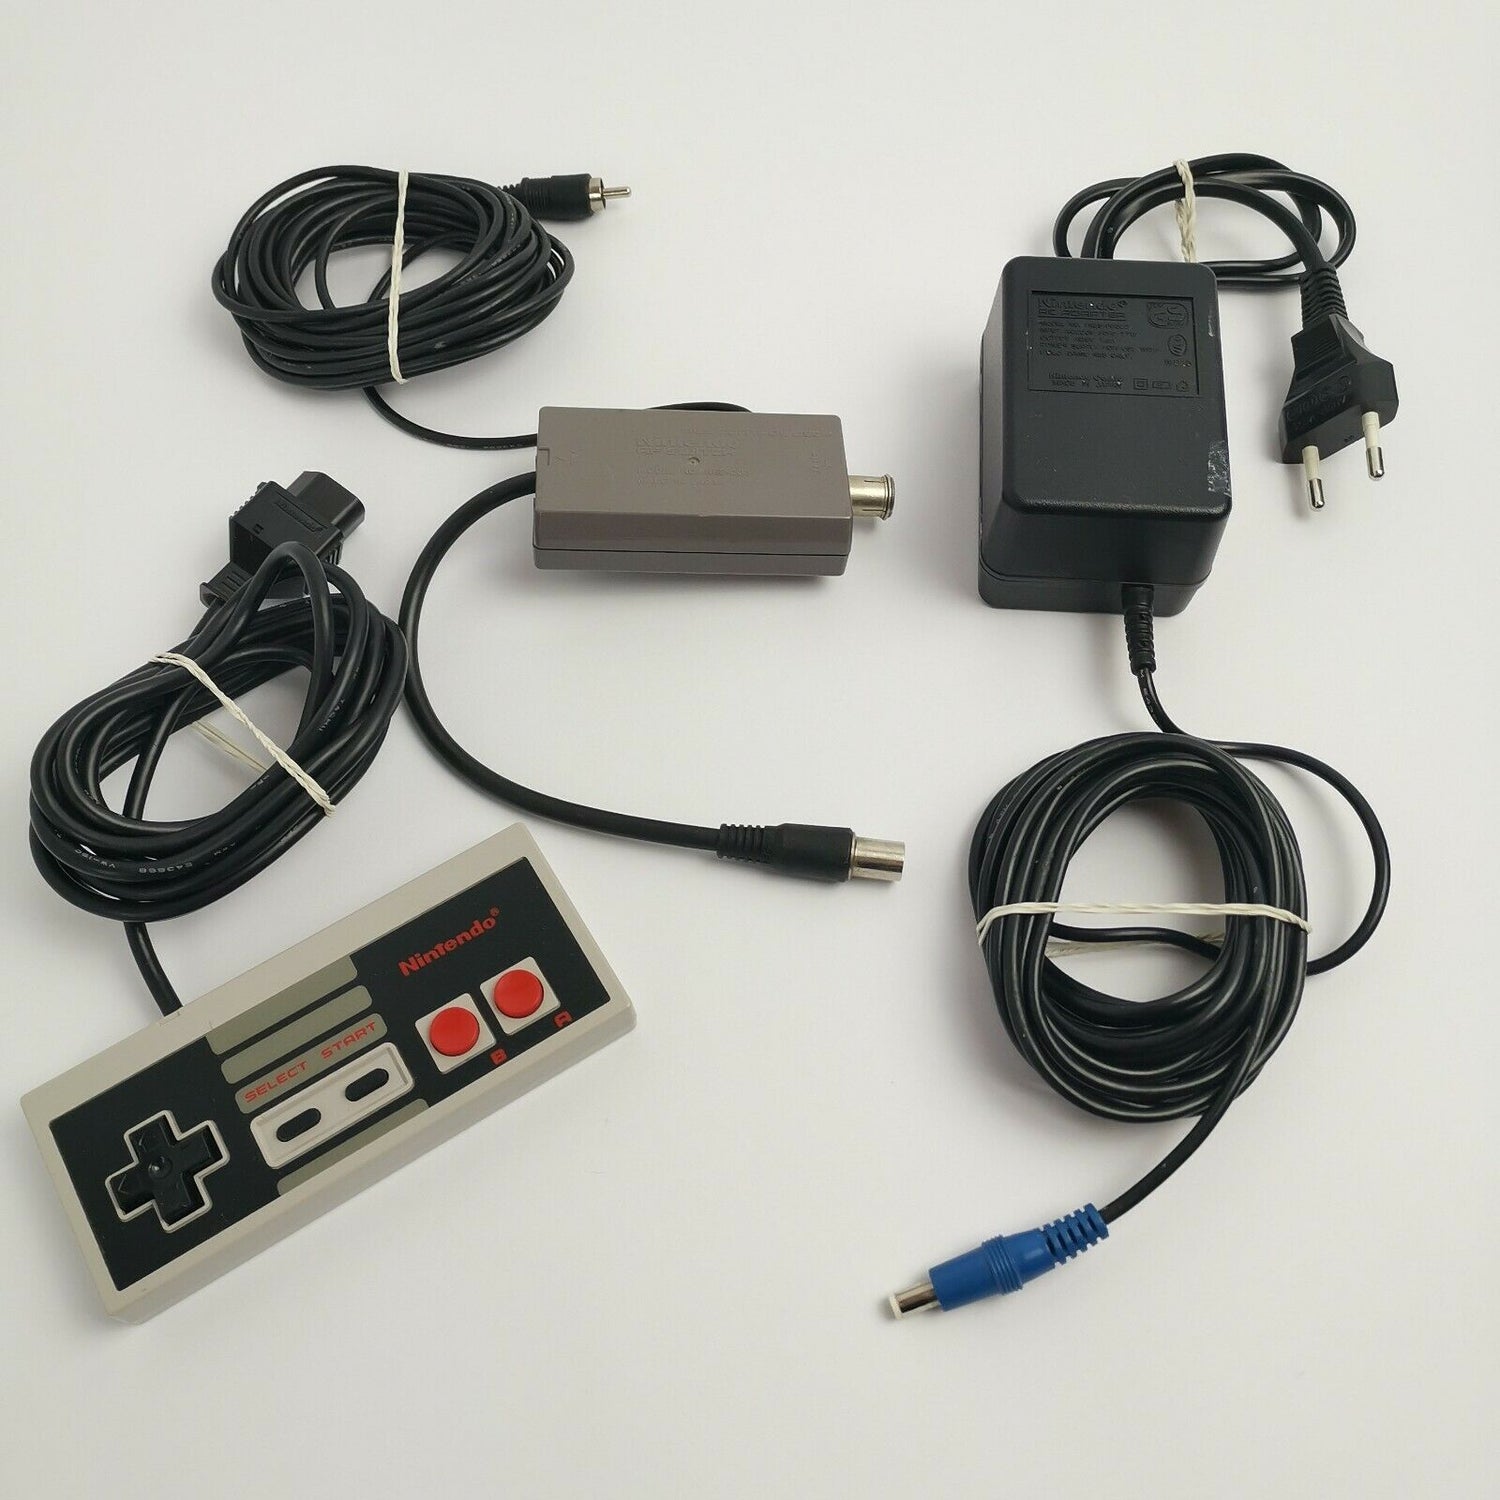 Nintendo NES Multinorm Console Console, 1 controller and cable